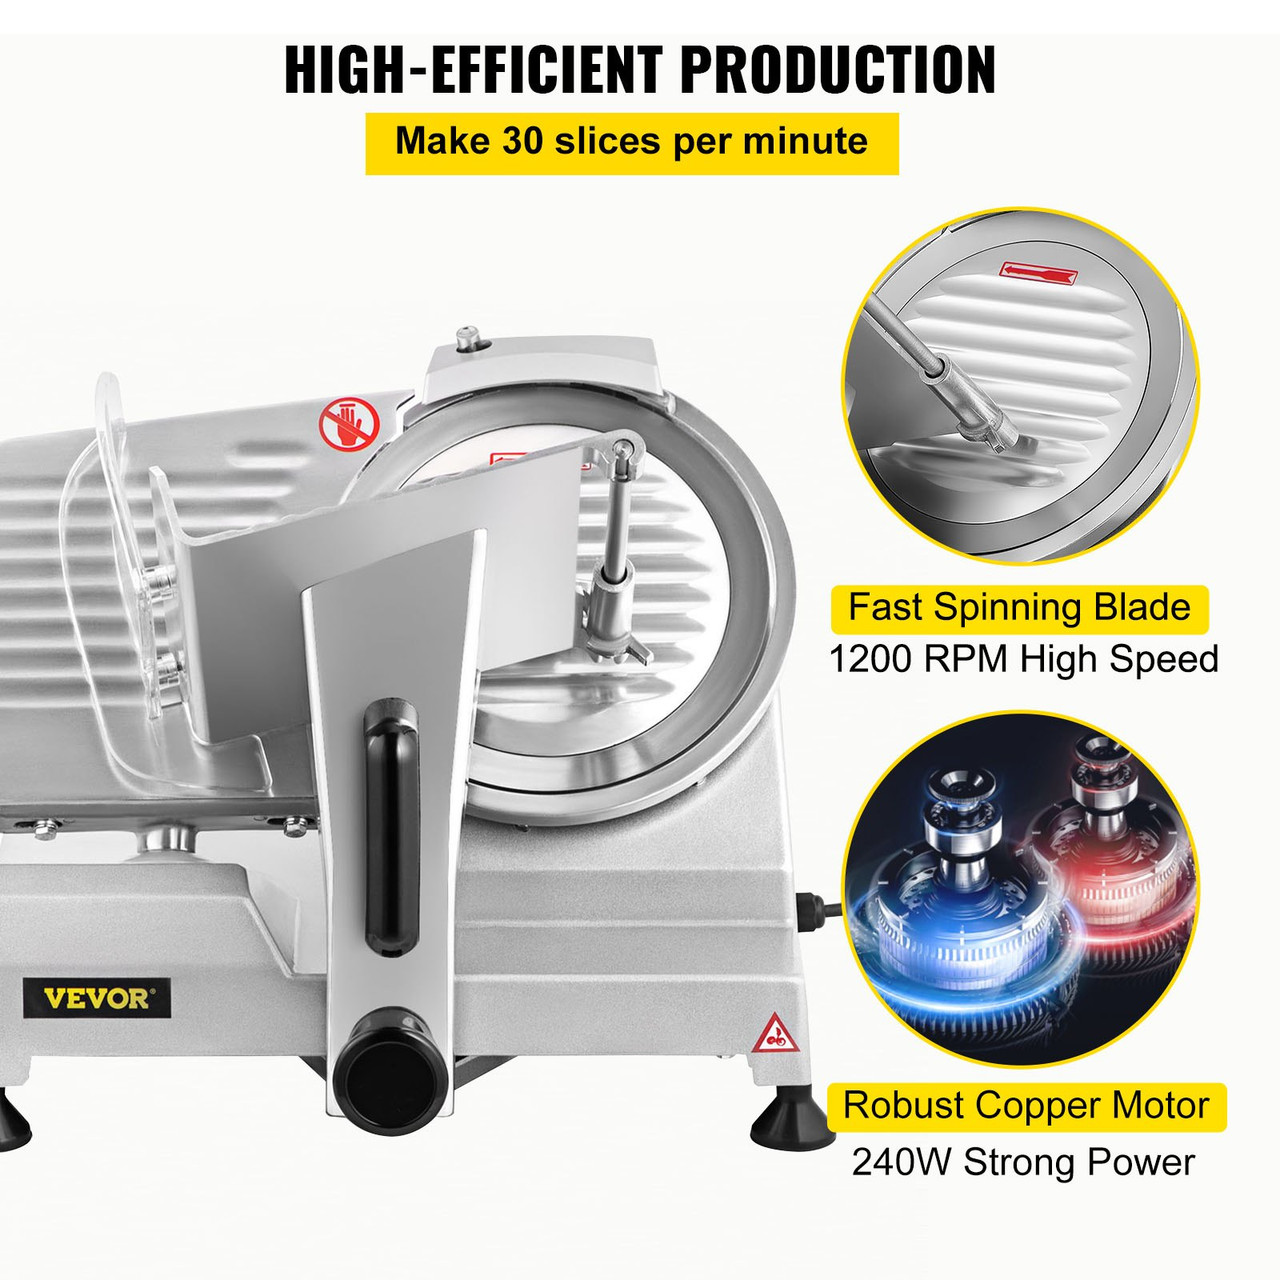 Commercial Meat Slicer, 240W Electric Deli Food Slicer, 1200RPM Meat Slicer with 8'' Chromium-plated Steel Blade, 0-12mm Adjustable Thickness Electric Meat Slicer for Home & Commercial Use